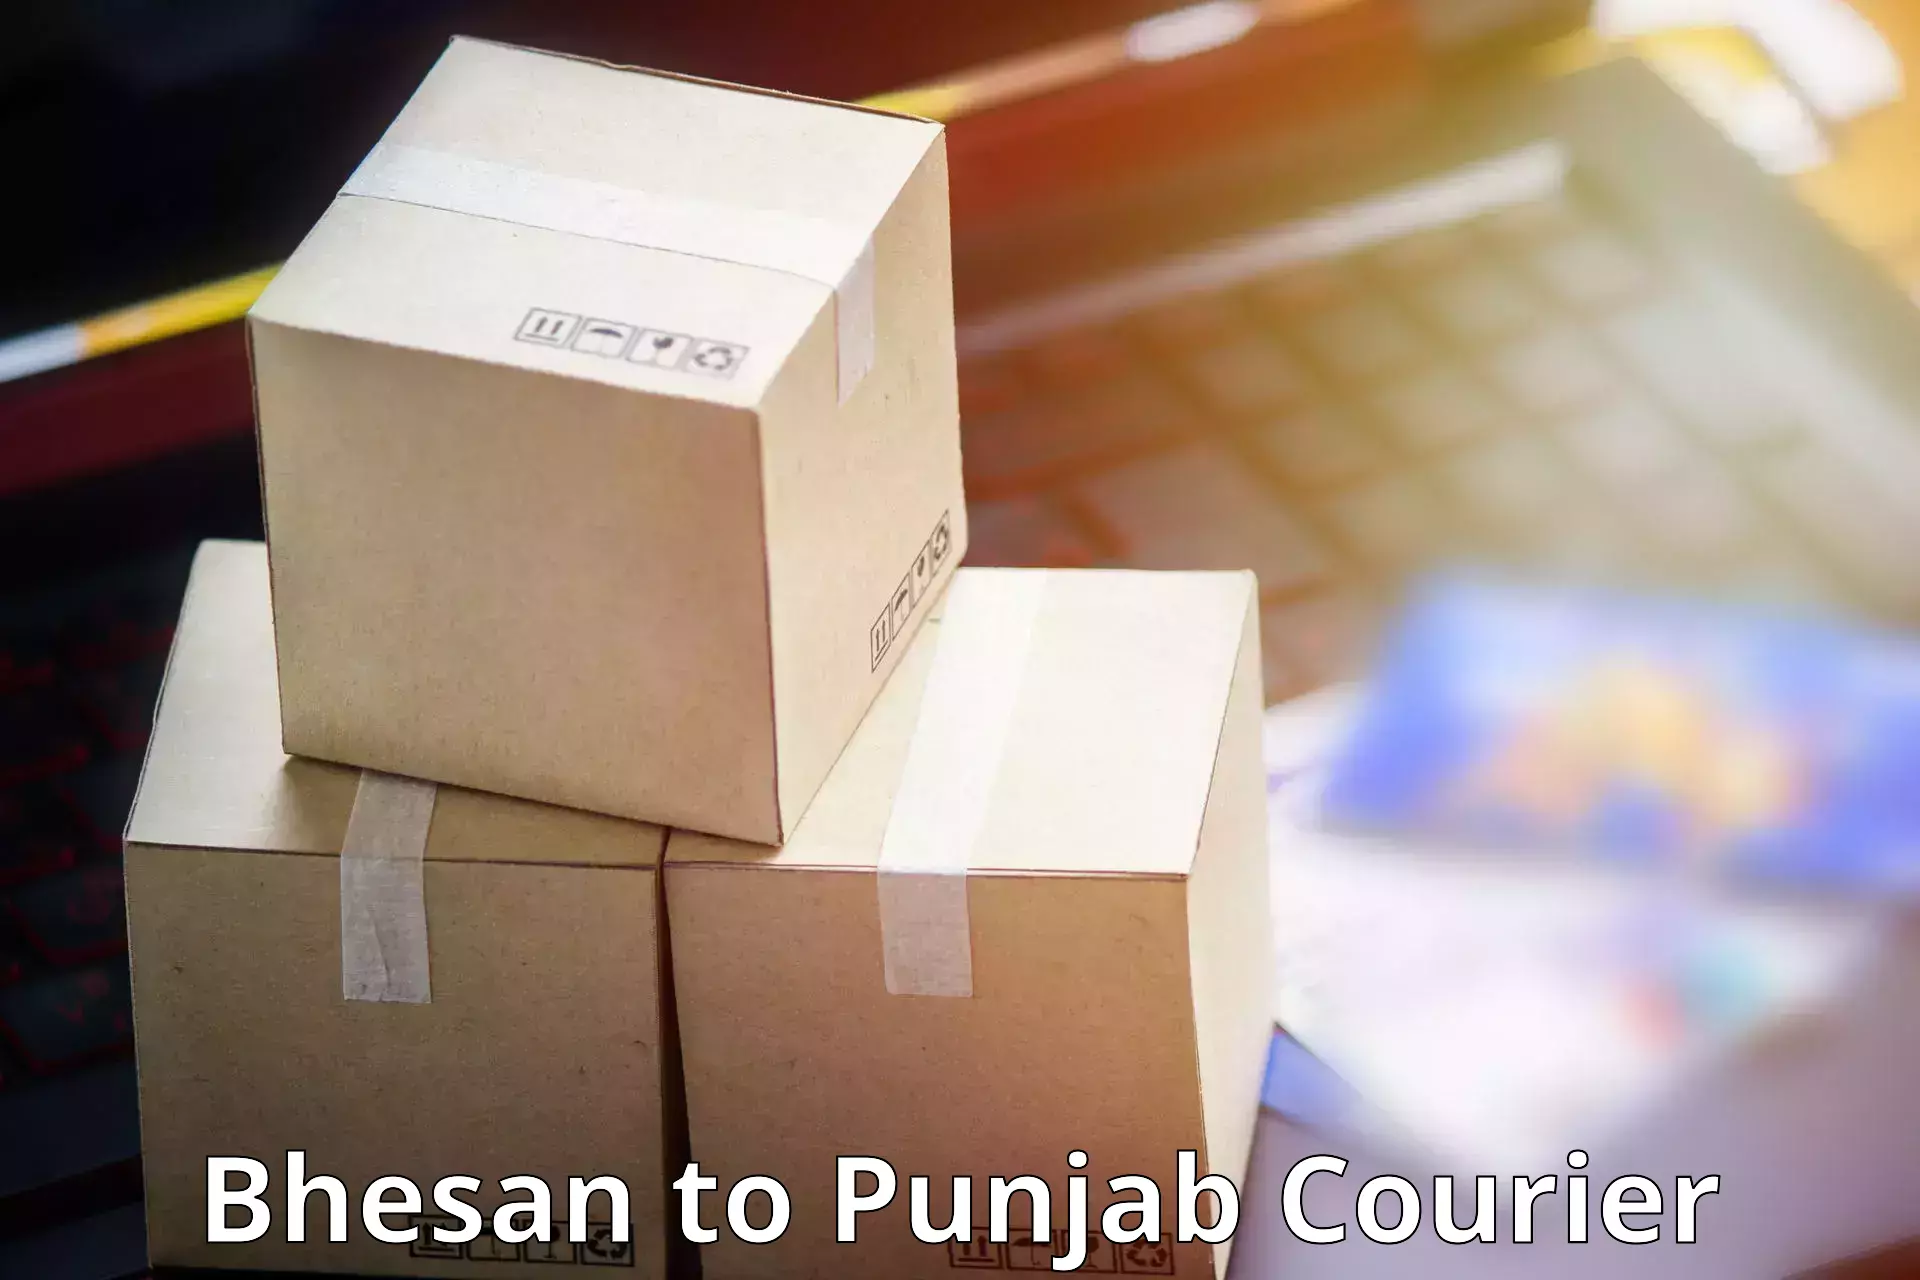 Air courier services Bhesan to Ludhiana